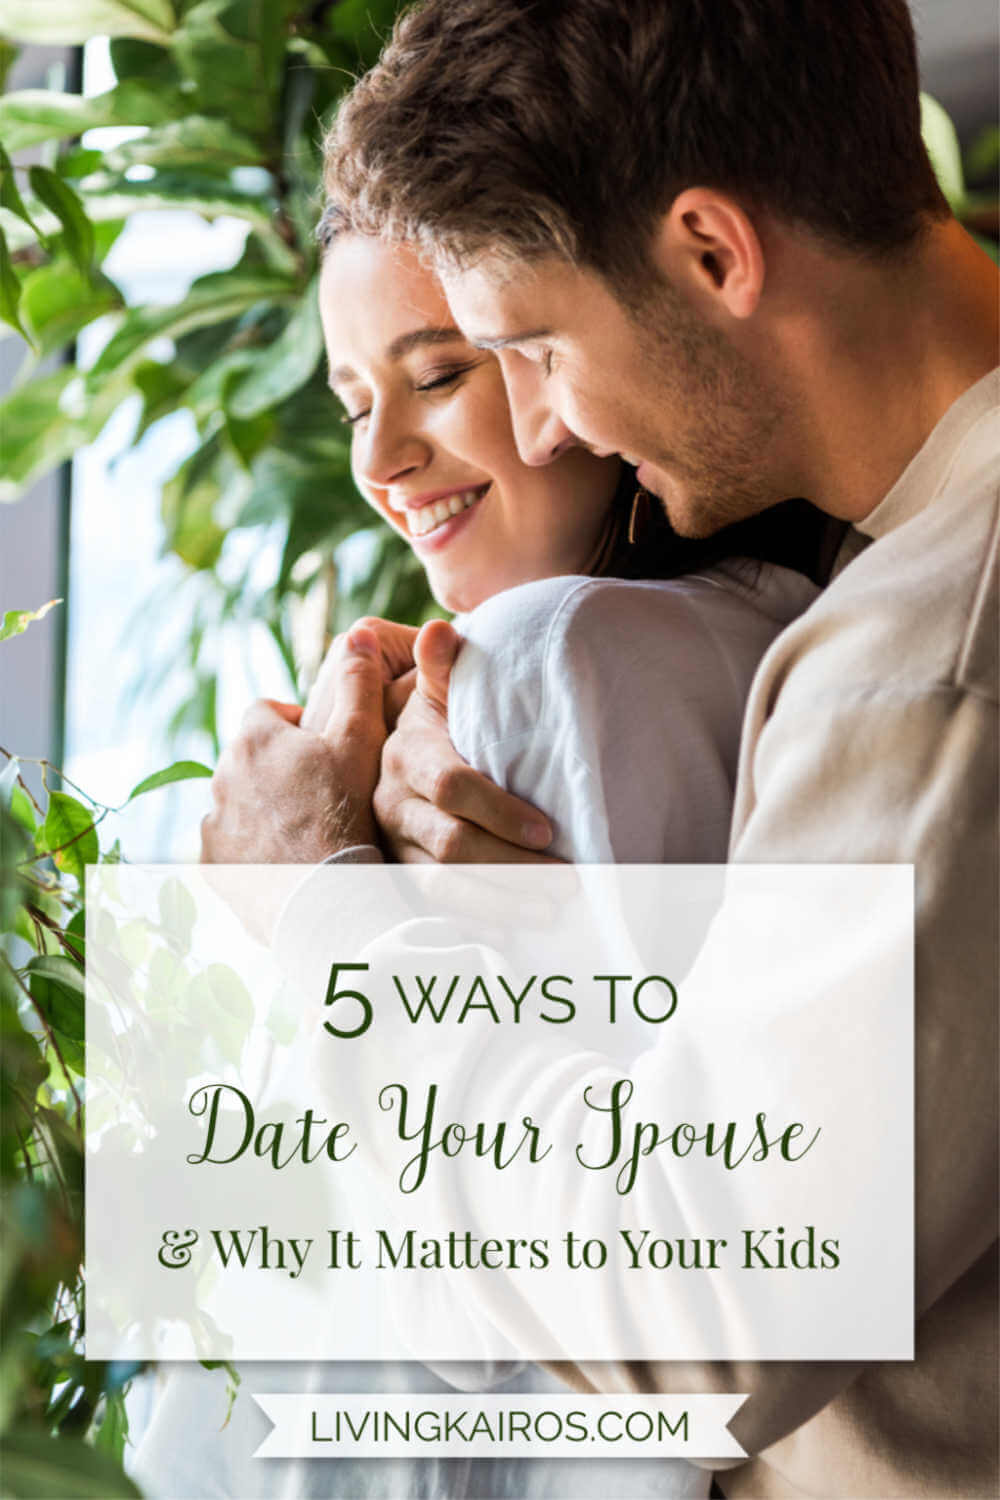 Five Ways to Date Your Spouse, and Why It Matters!